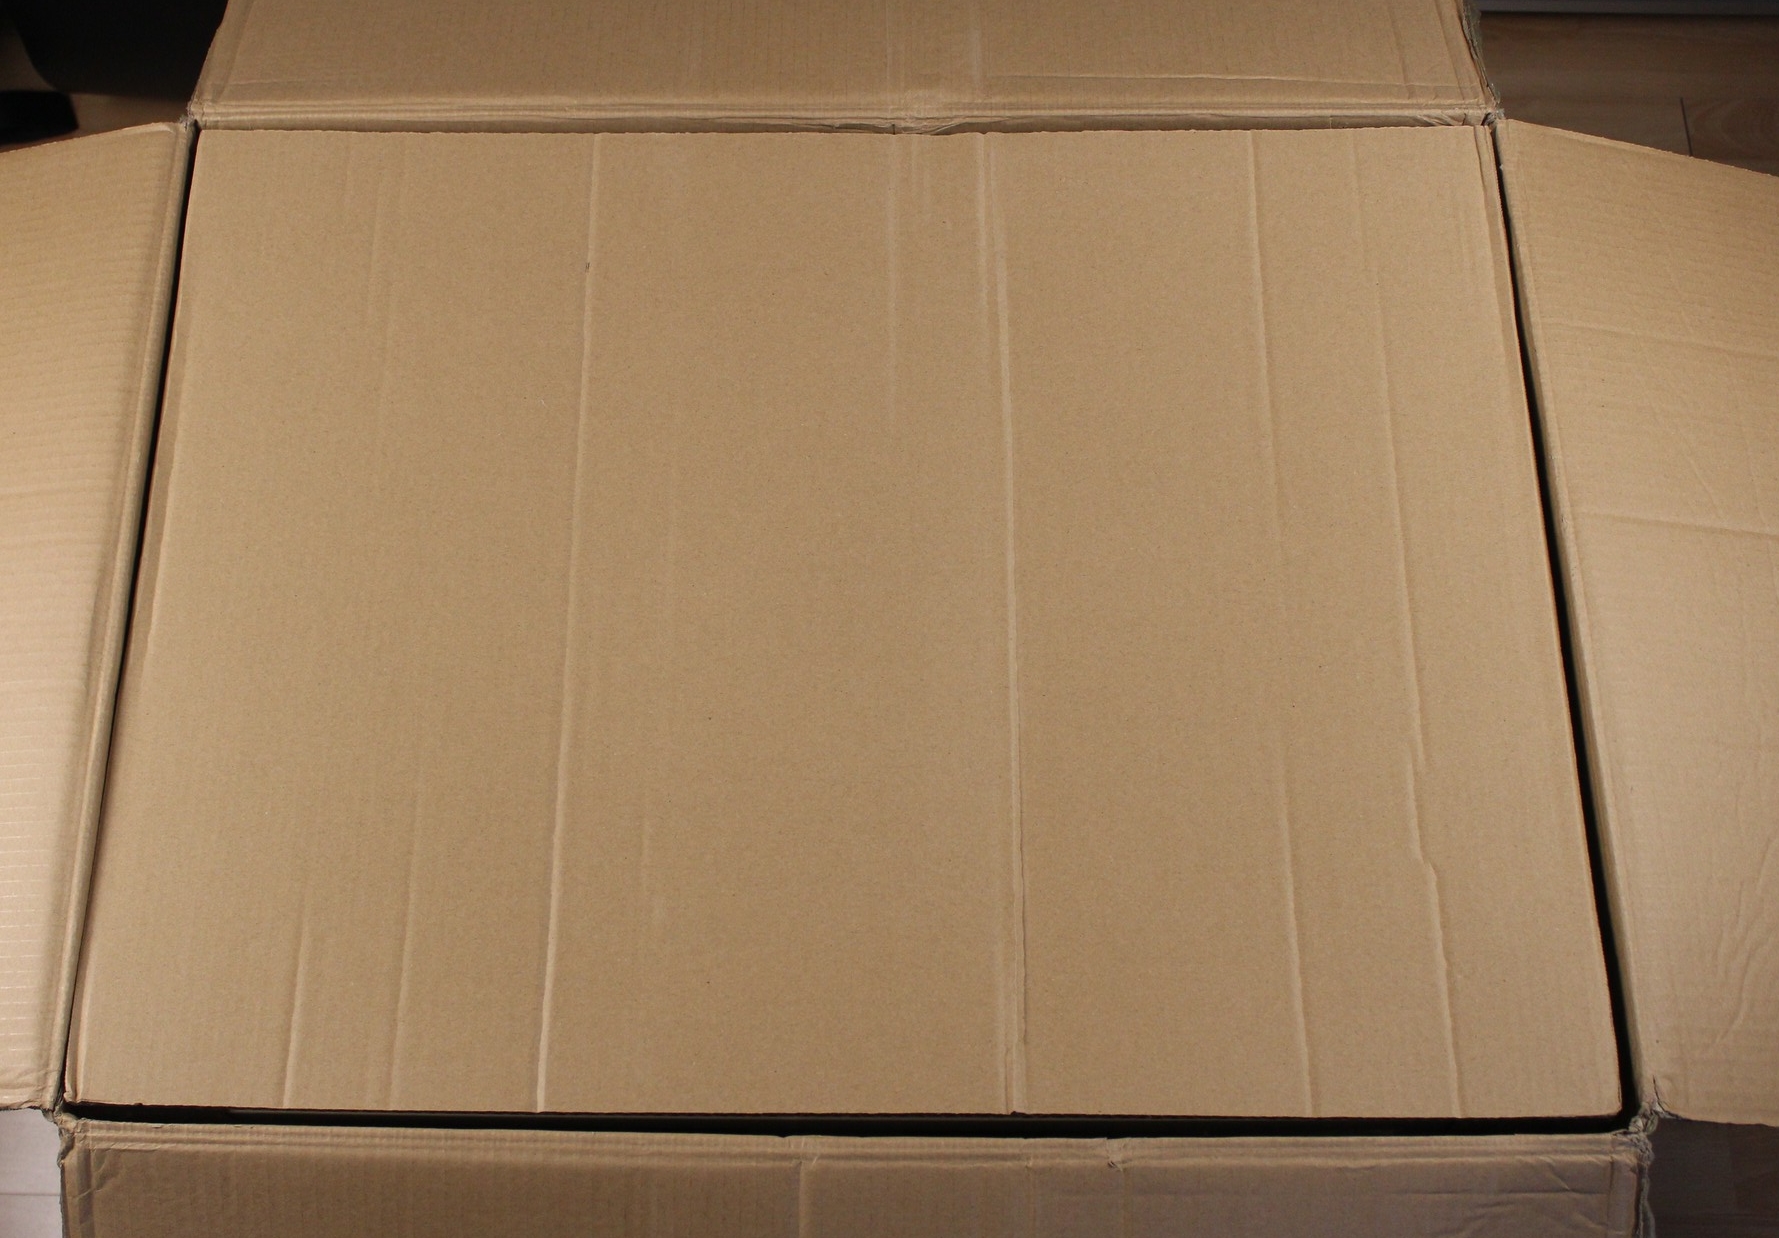 Anycubic Photon M3 Max Review Packaging 5 | Anycubic Photon M3 Max Review: Who Needs FDM Anymore?